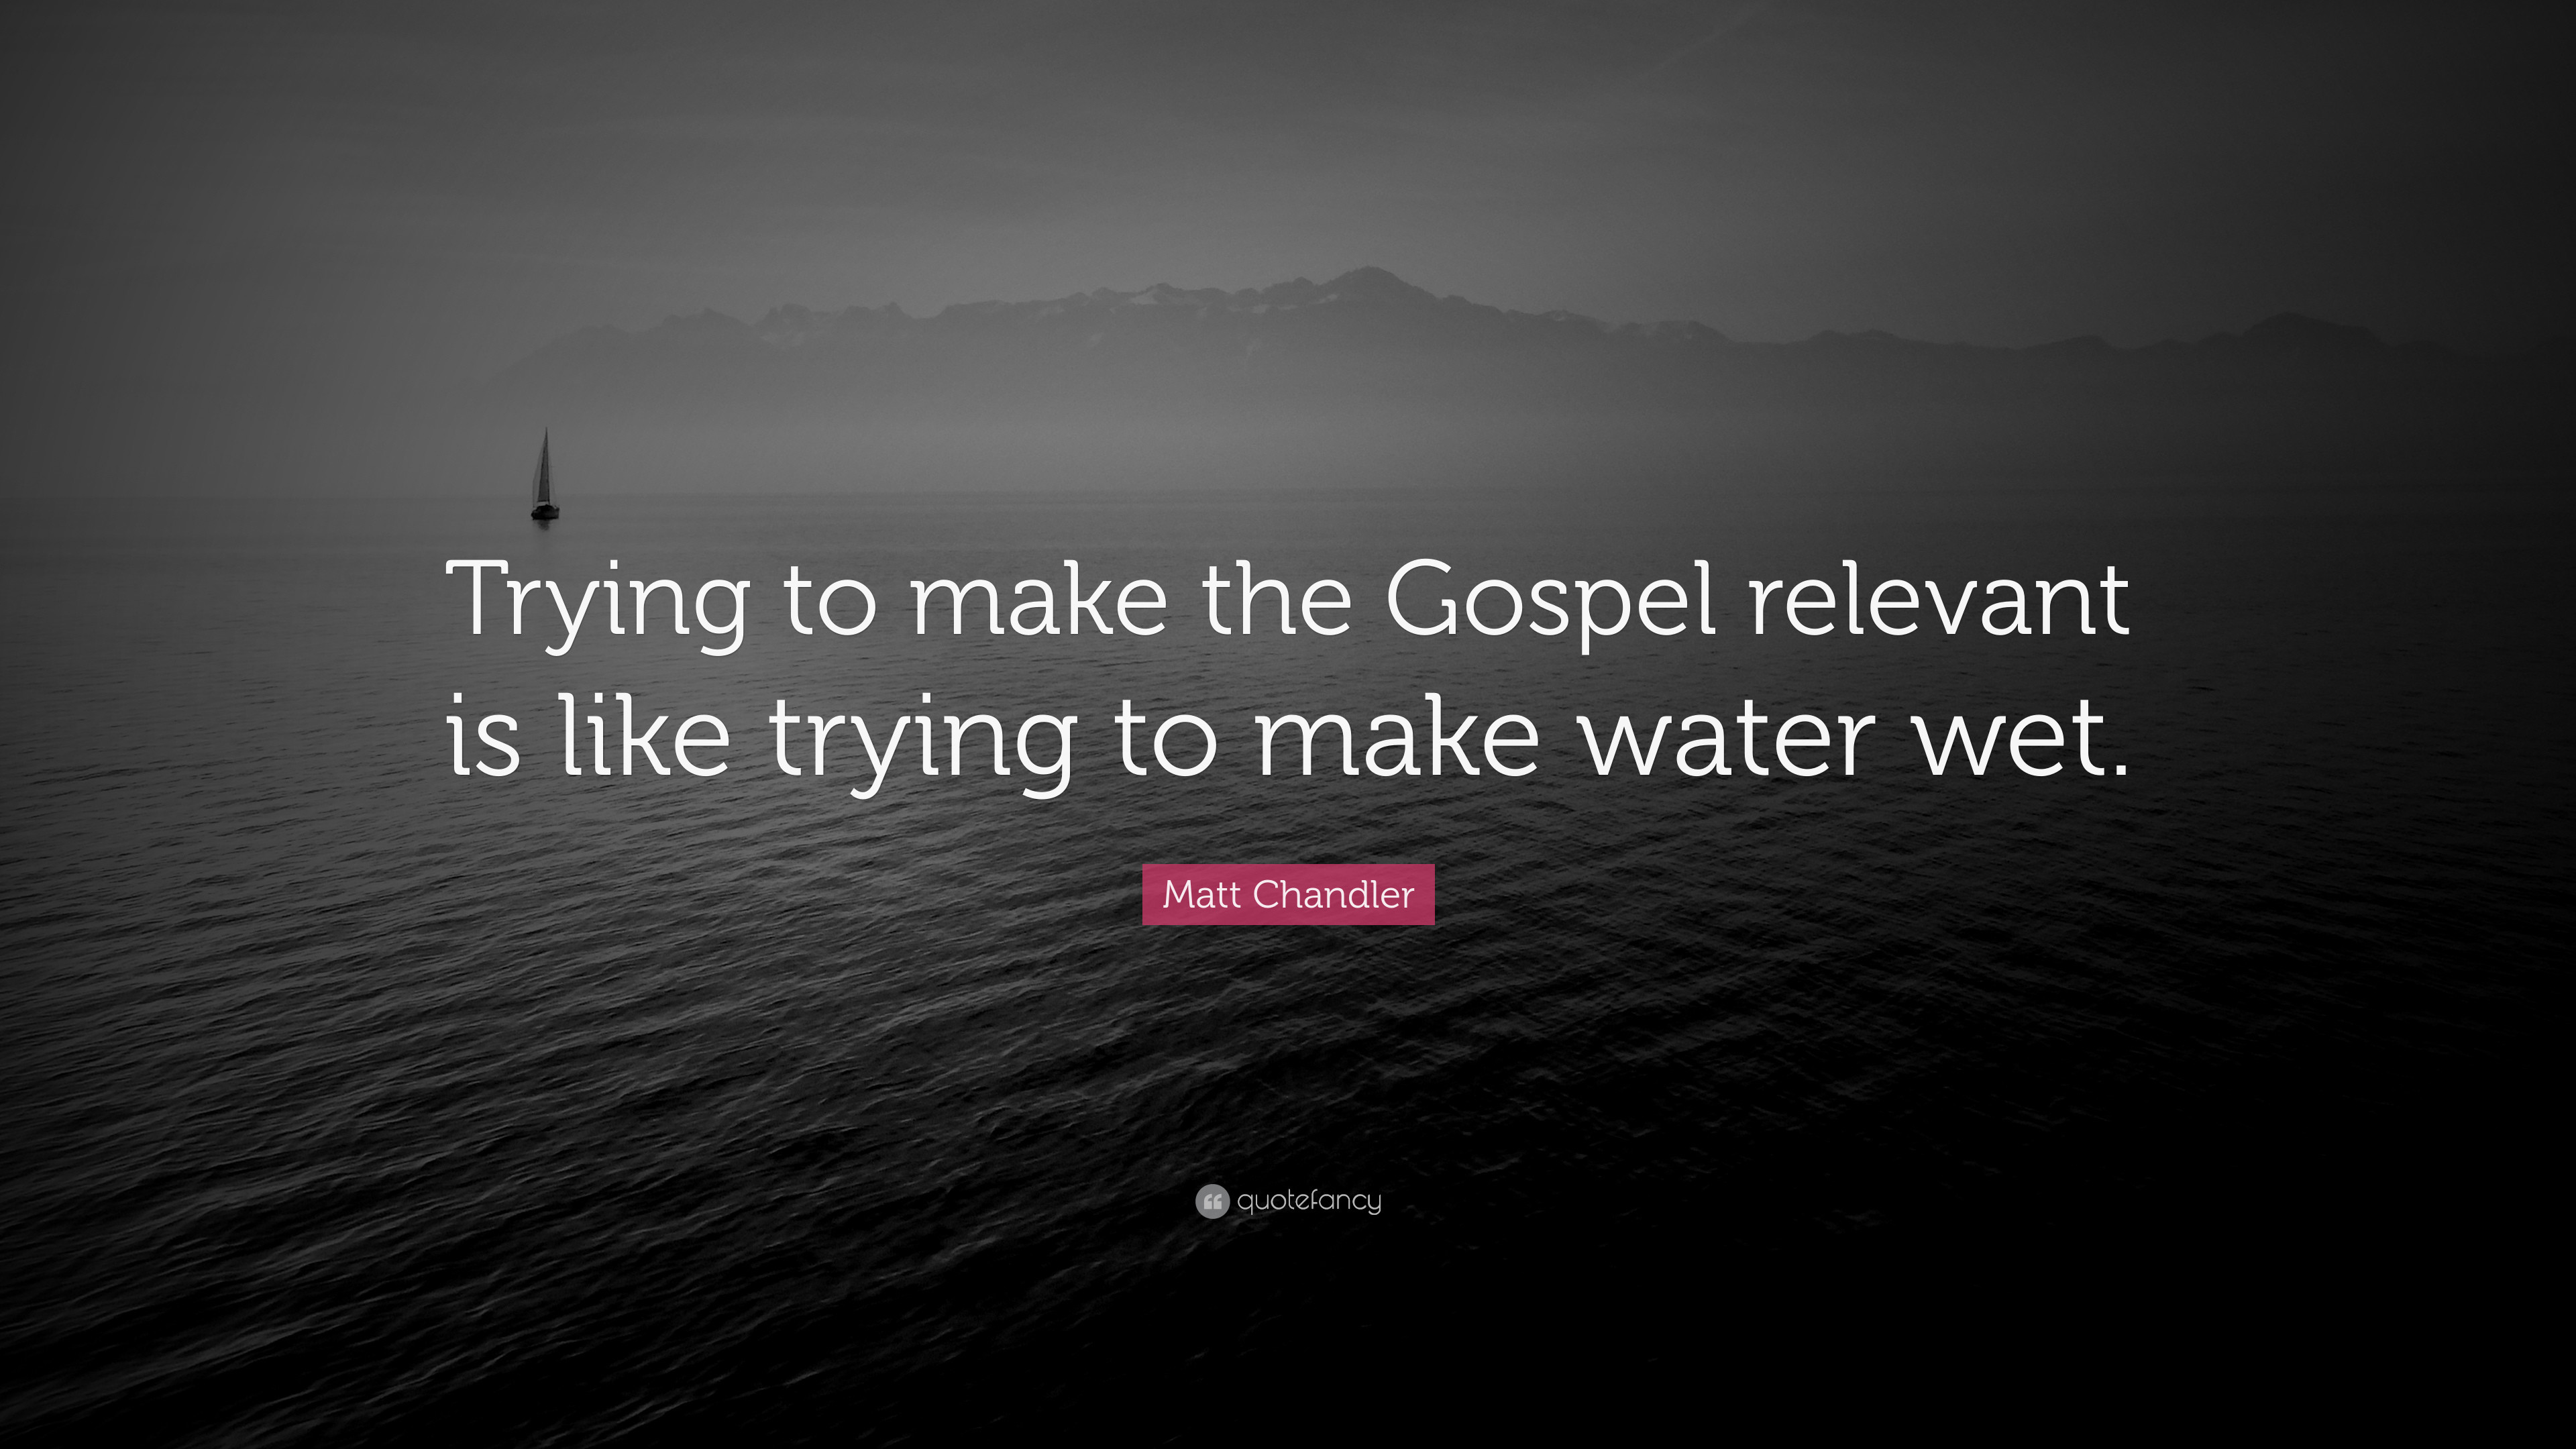 3840x2160 Matt Chandler Quote: “Trying to make the Gospel relevant is like trying to  make